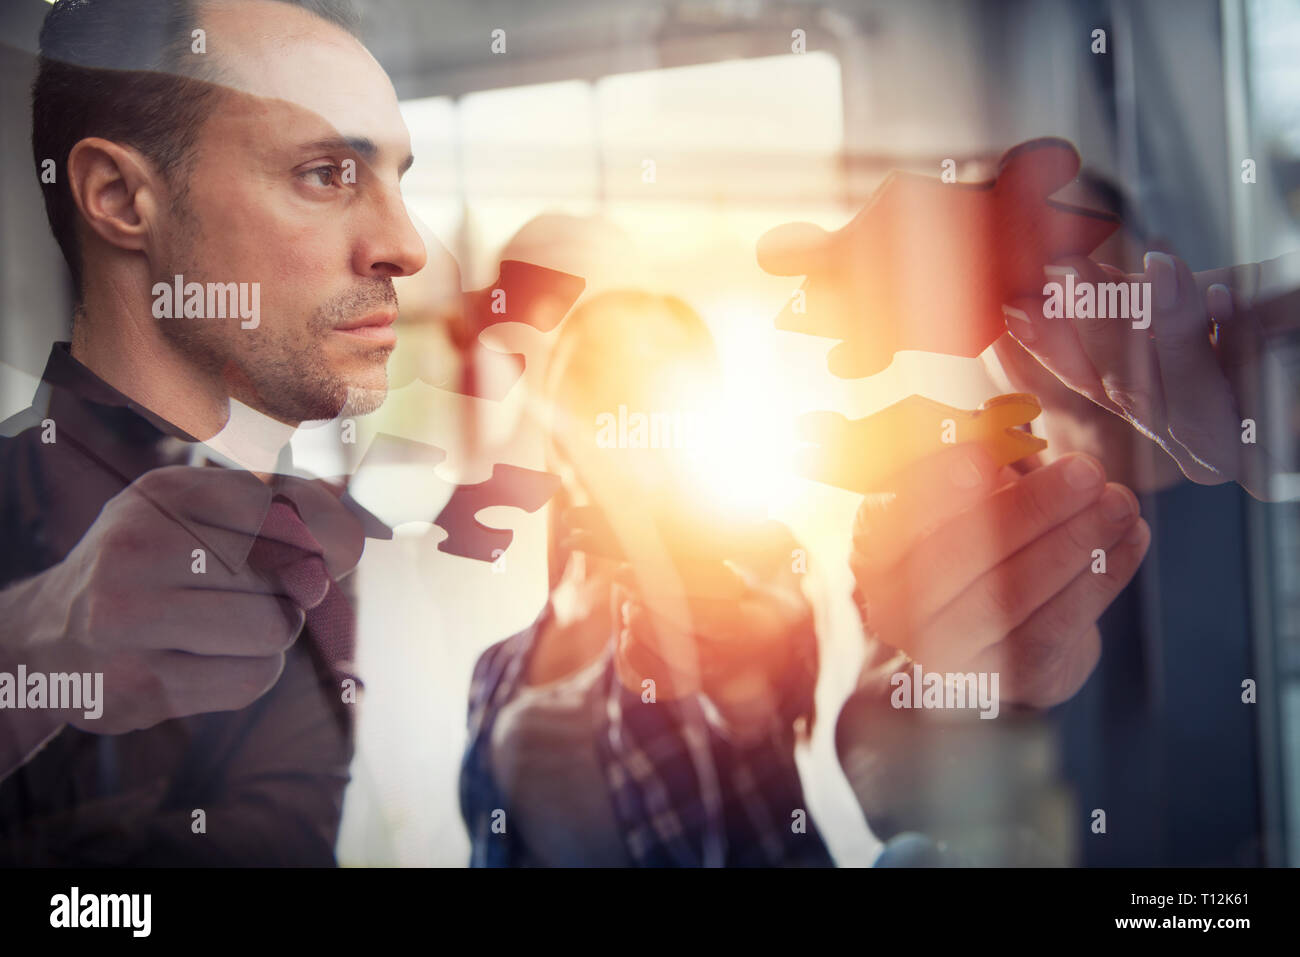 Business people join puzzle pieces. Concept of teamwork and partnership. double exposure Stock Photo